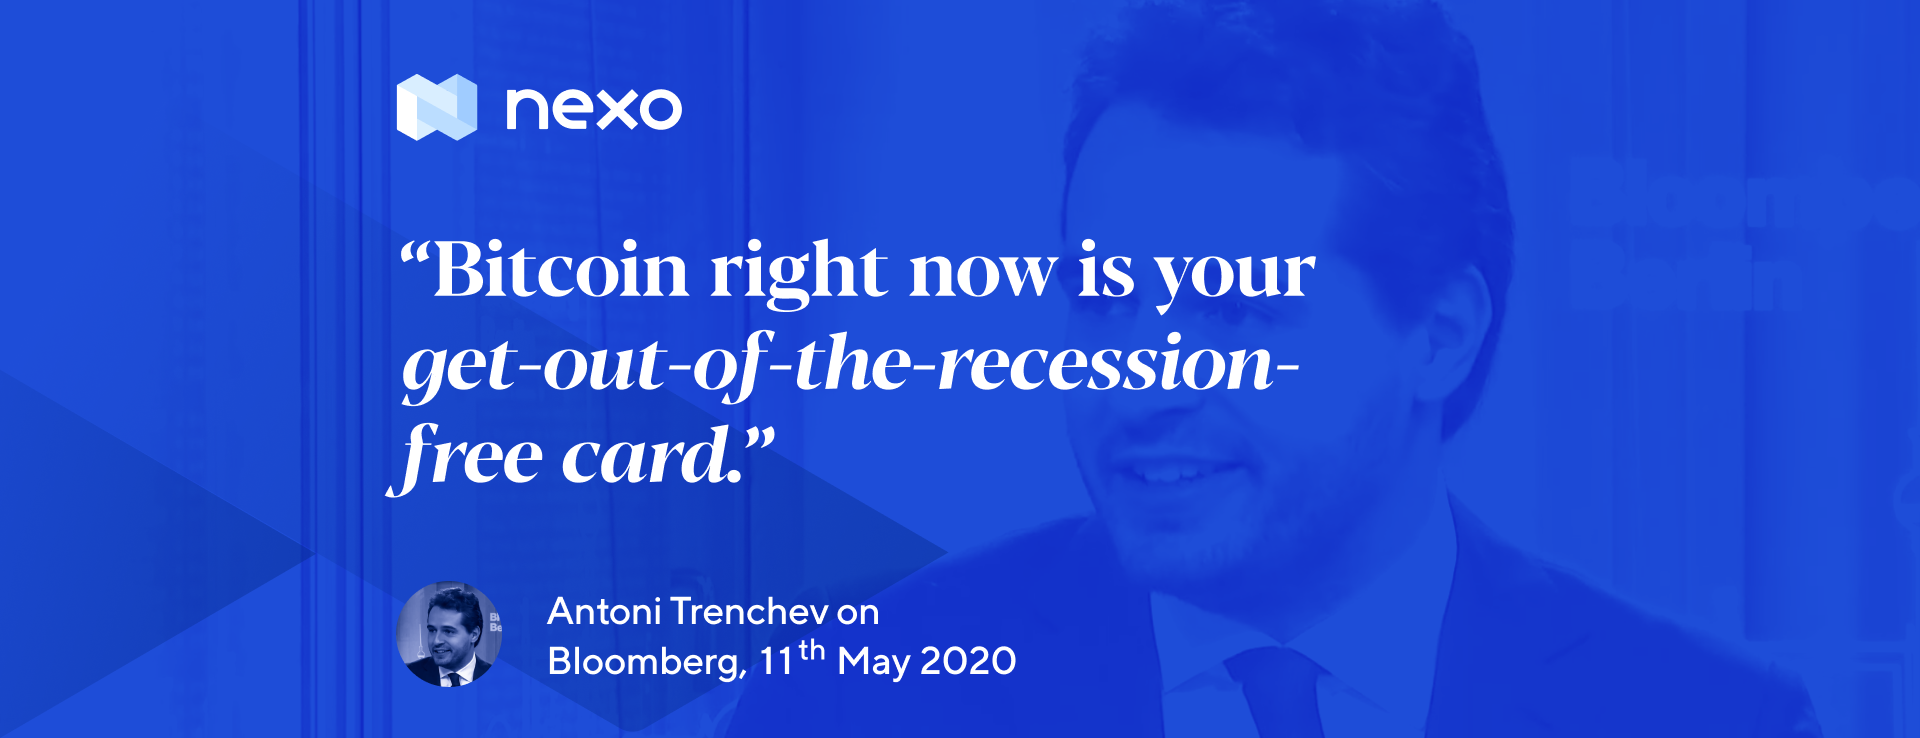 Nexo’s Trenchev on Bloomberg: BTC Is Your “Get-Out-of-the-Recession-Free Card”